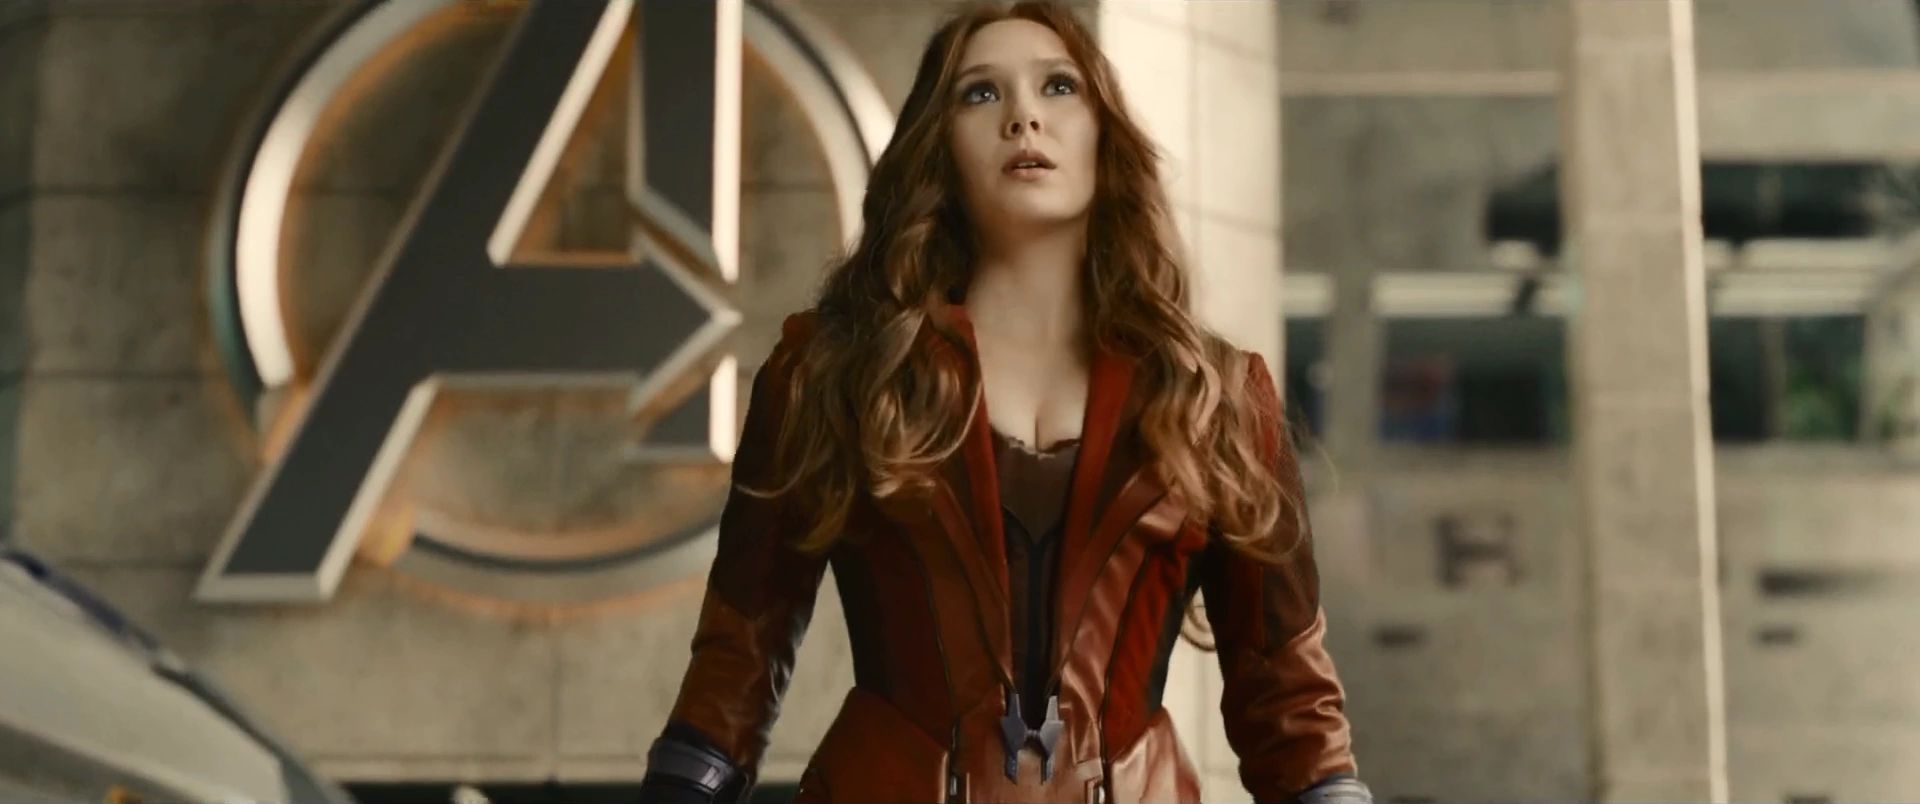 Detailed Look at Scarlet Witch's AVENGERS: AGE OF ULTRON Costume